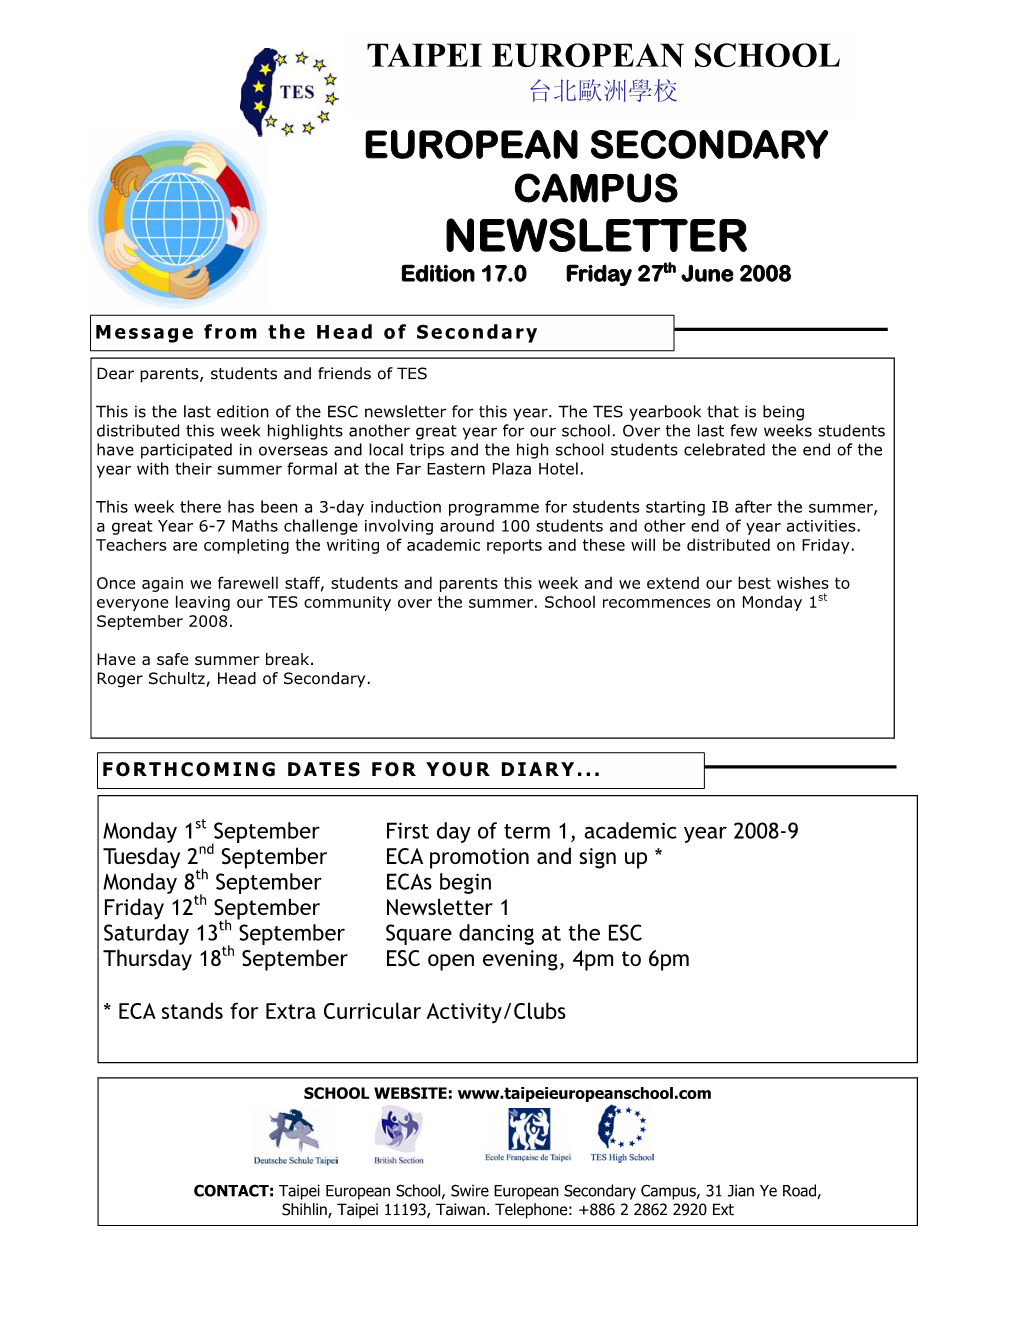 NEWSLETTER Th Edition 17.0 Friday 27 June 2008